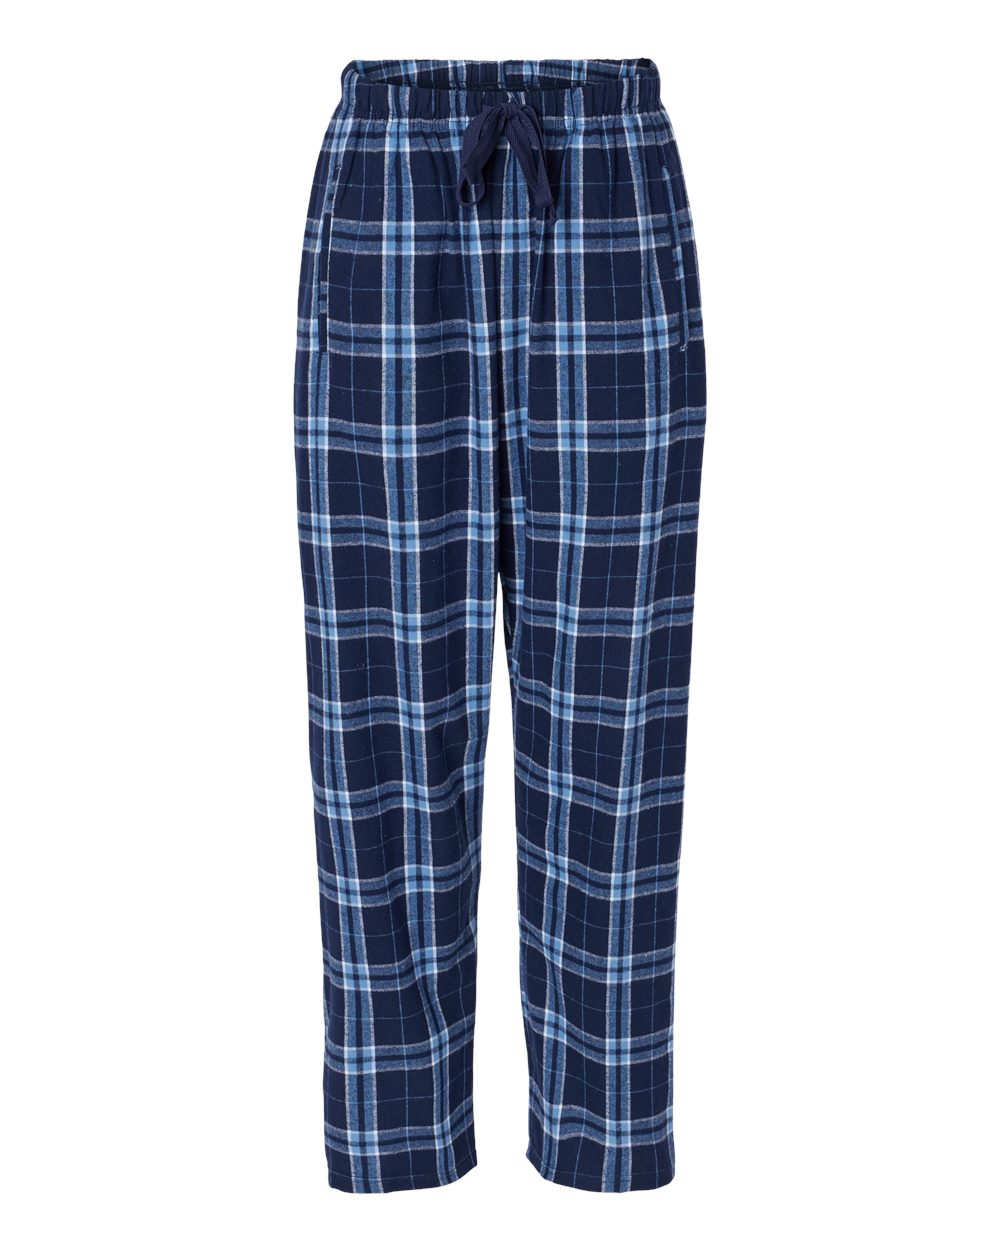 Boxercraft Ladies Haley Flannel Pants Navy and Columbia Color Pants with Custom Text